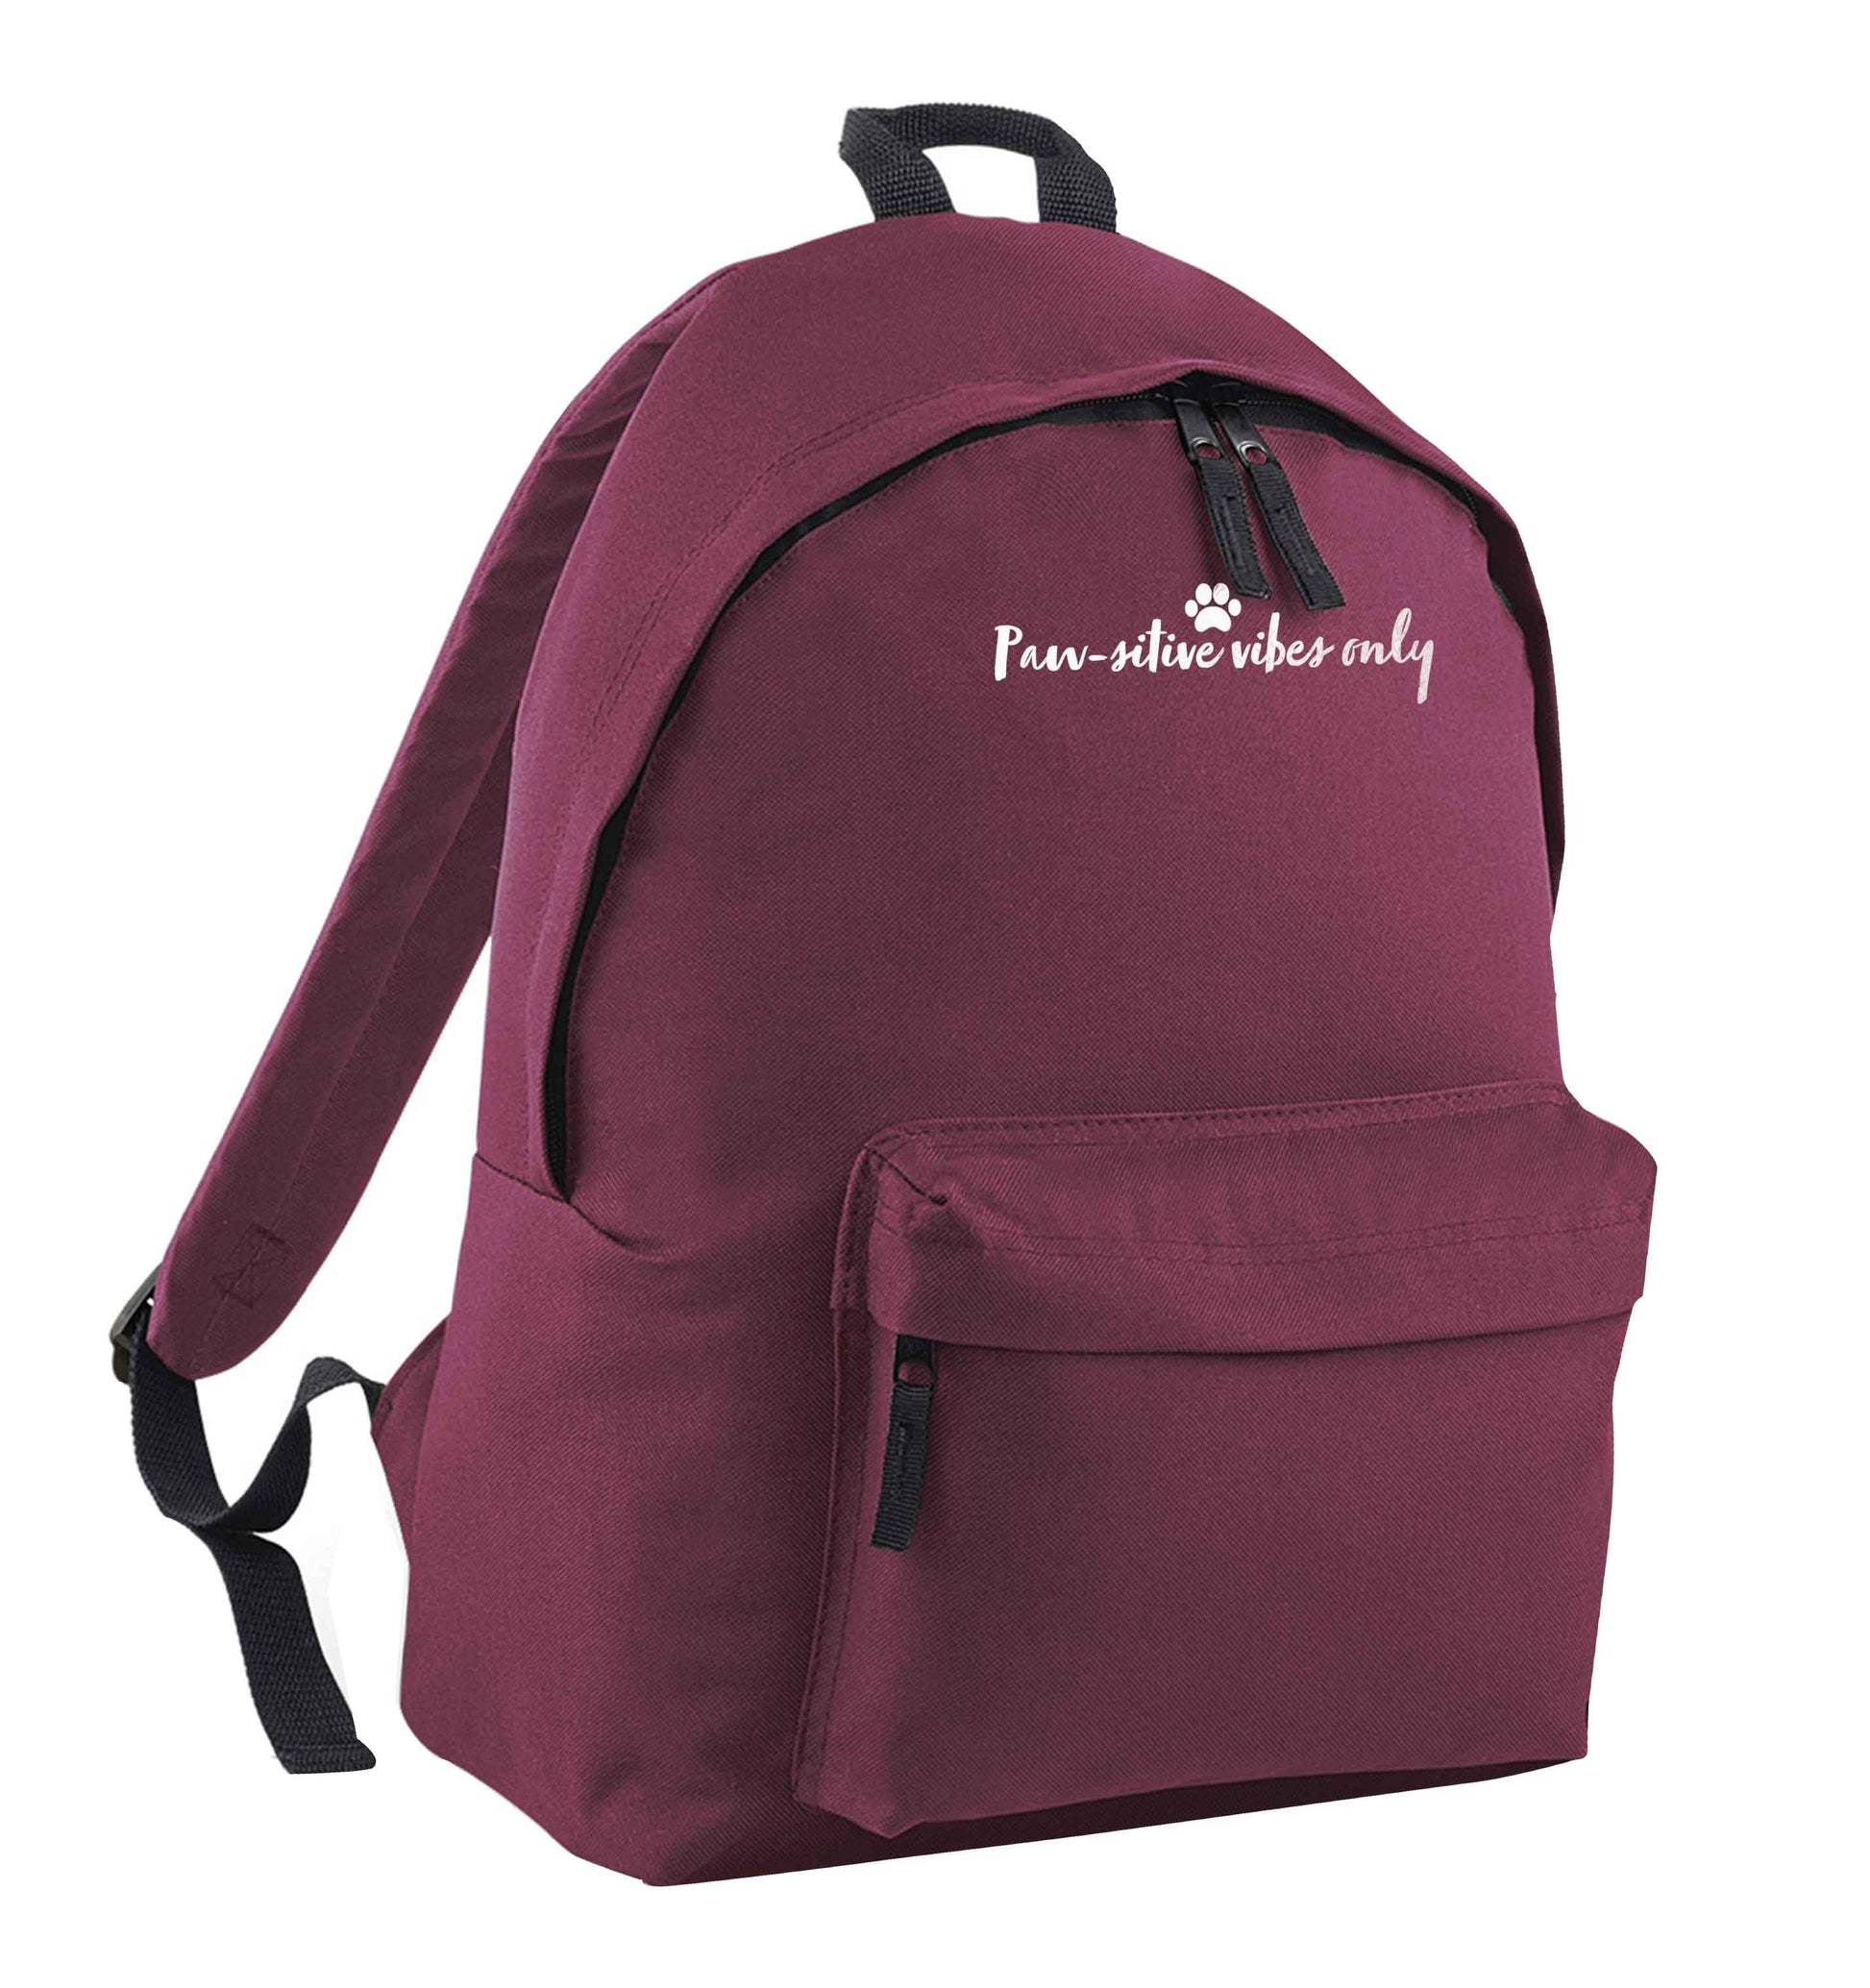 Pawsitive vibes only Kit maroon children's backpack